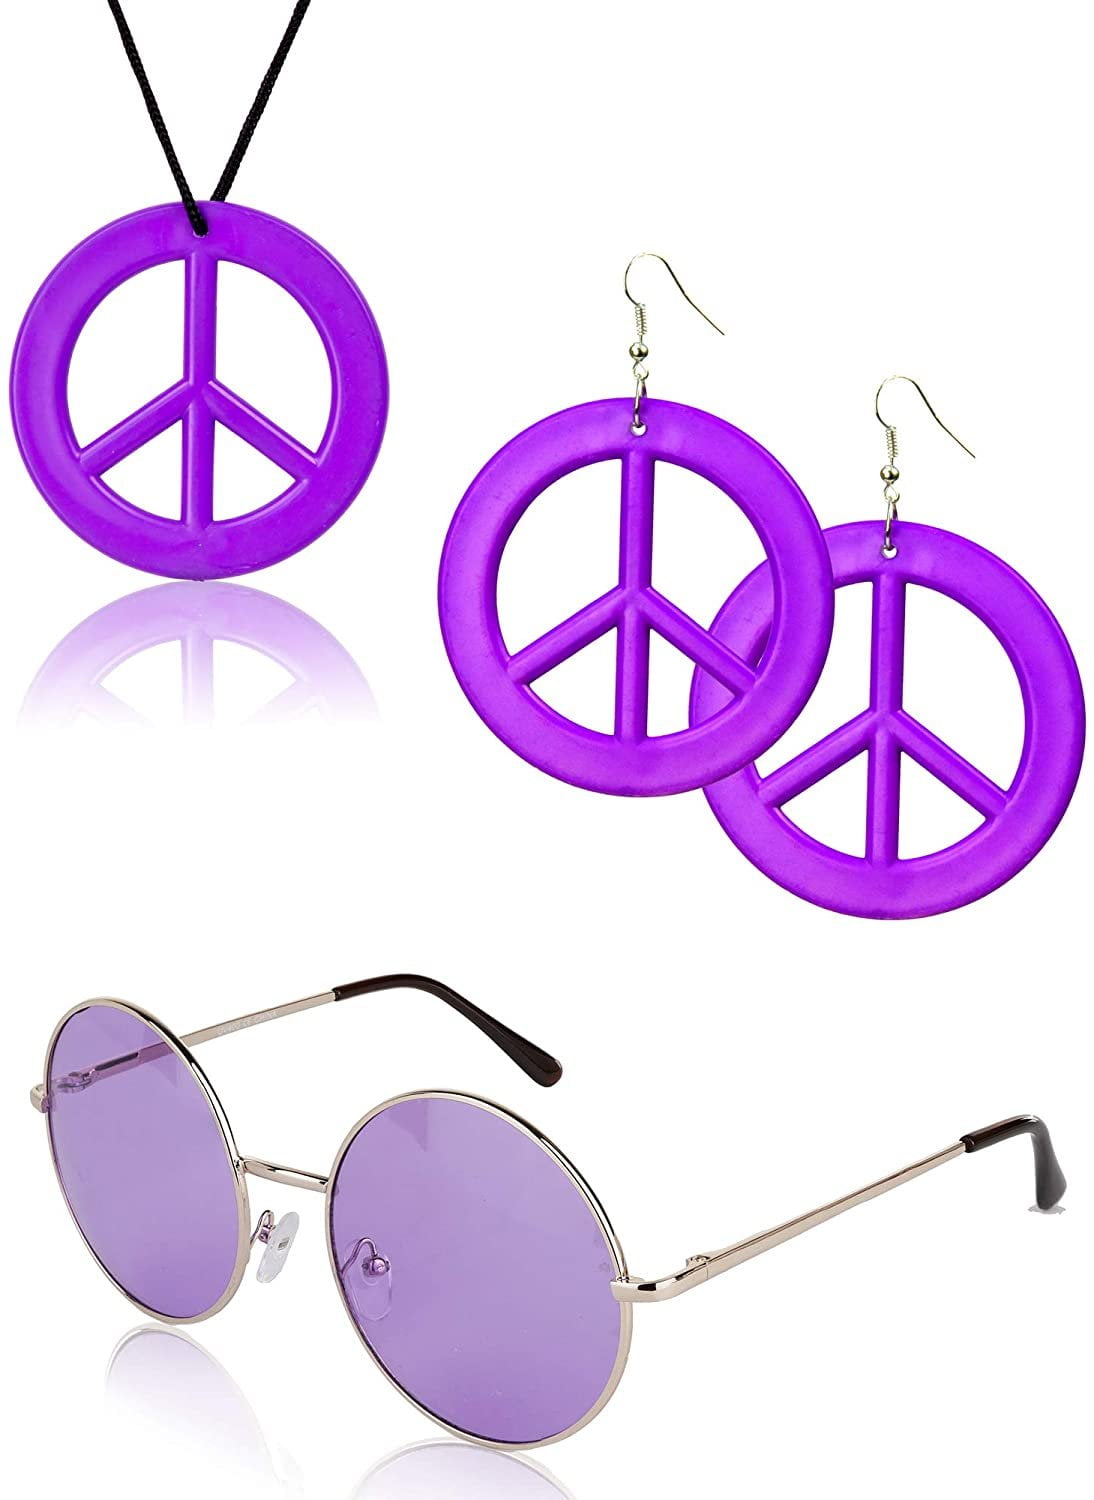 Hippie Accessories Round Glasses Peace Sign Necklace Earrings 60's